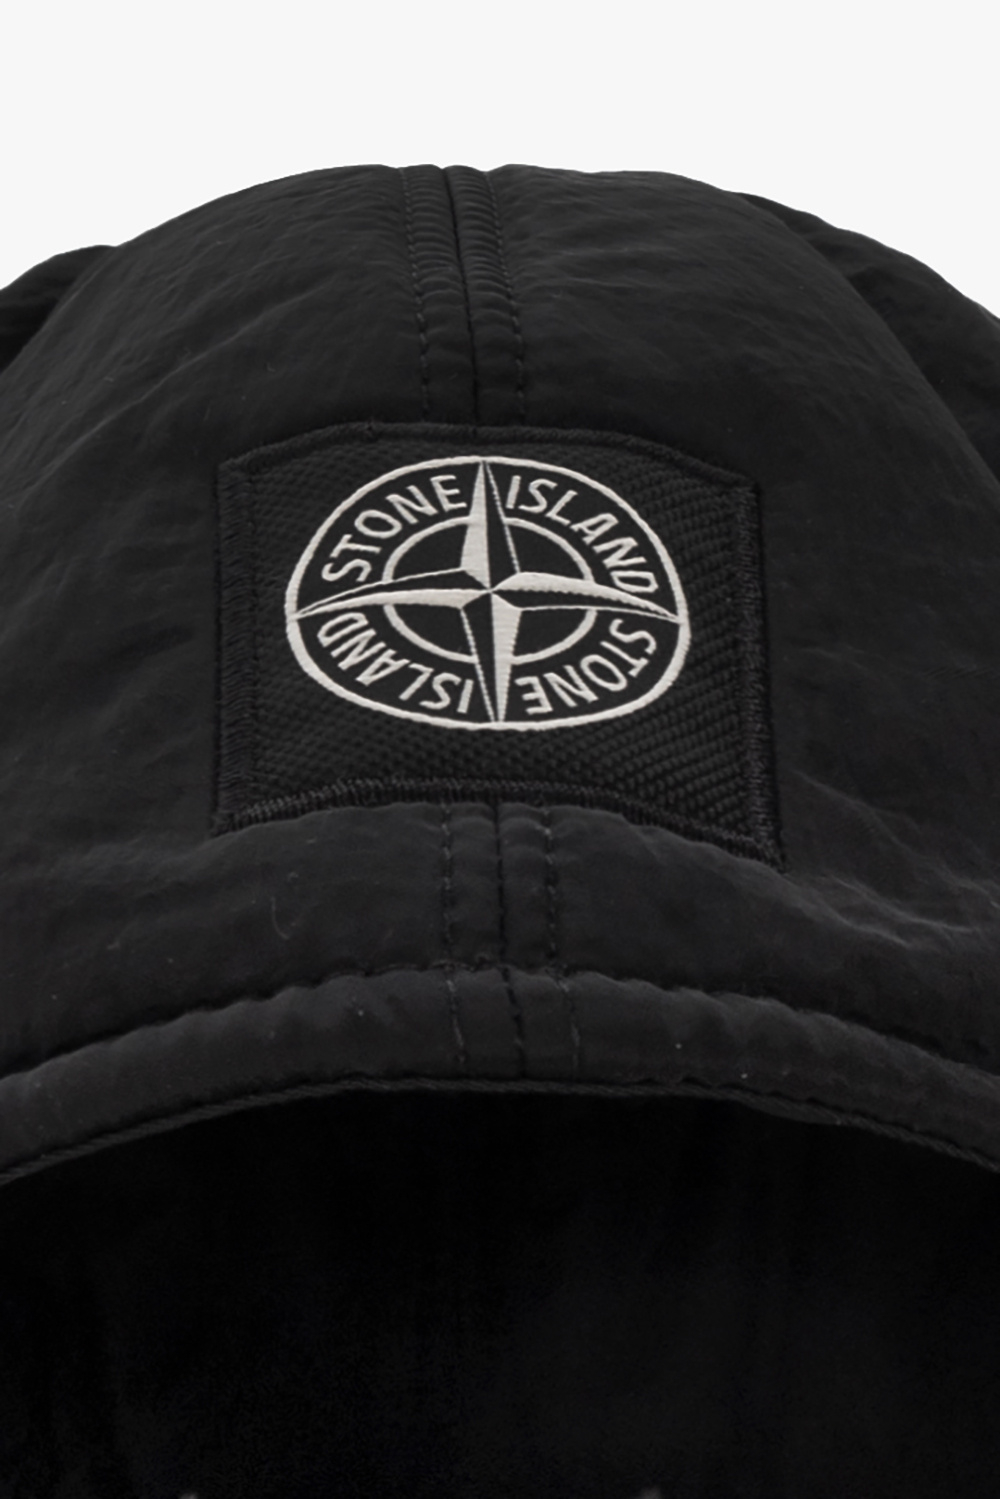 Stone Island Insulated baseball cap with visible mask